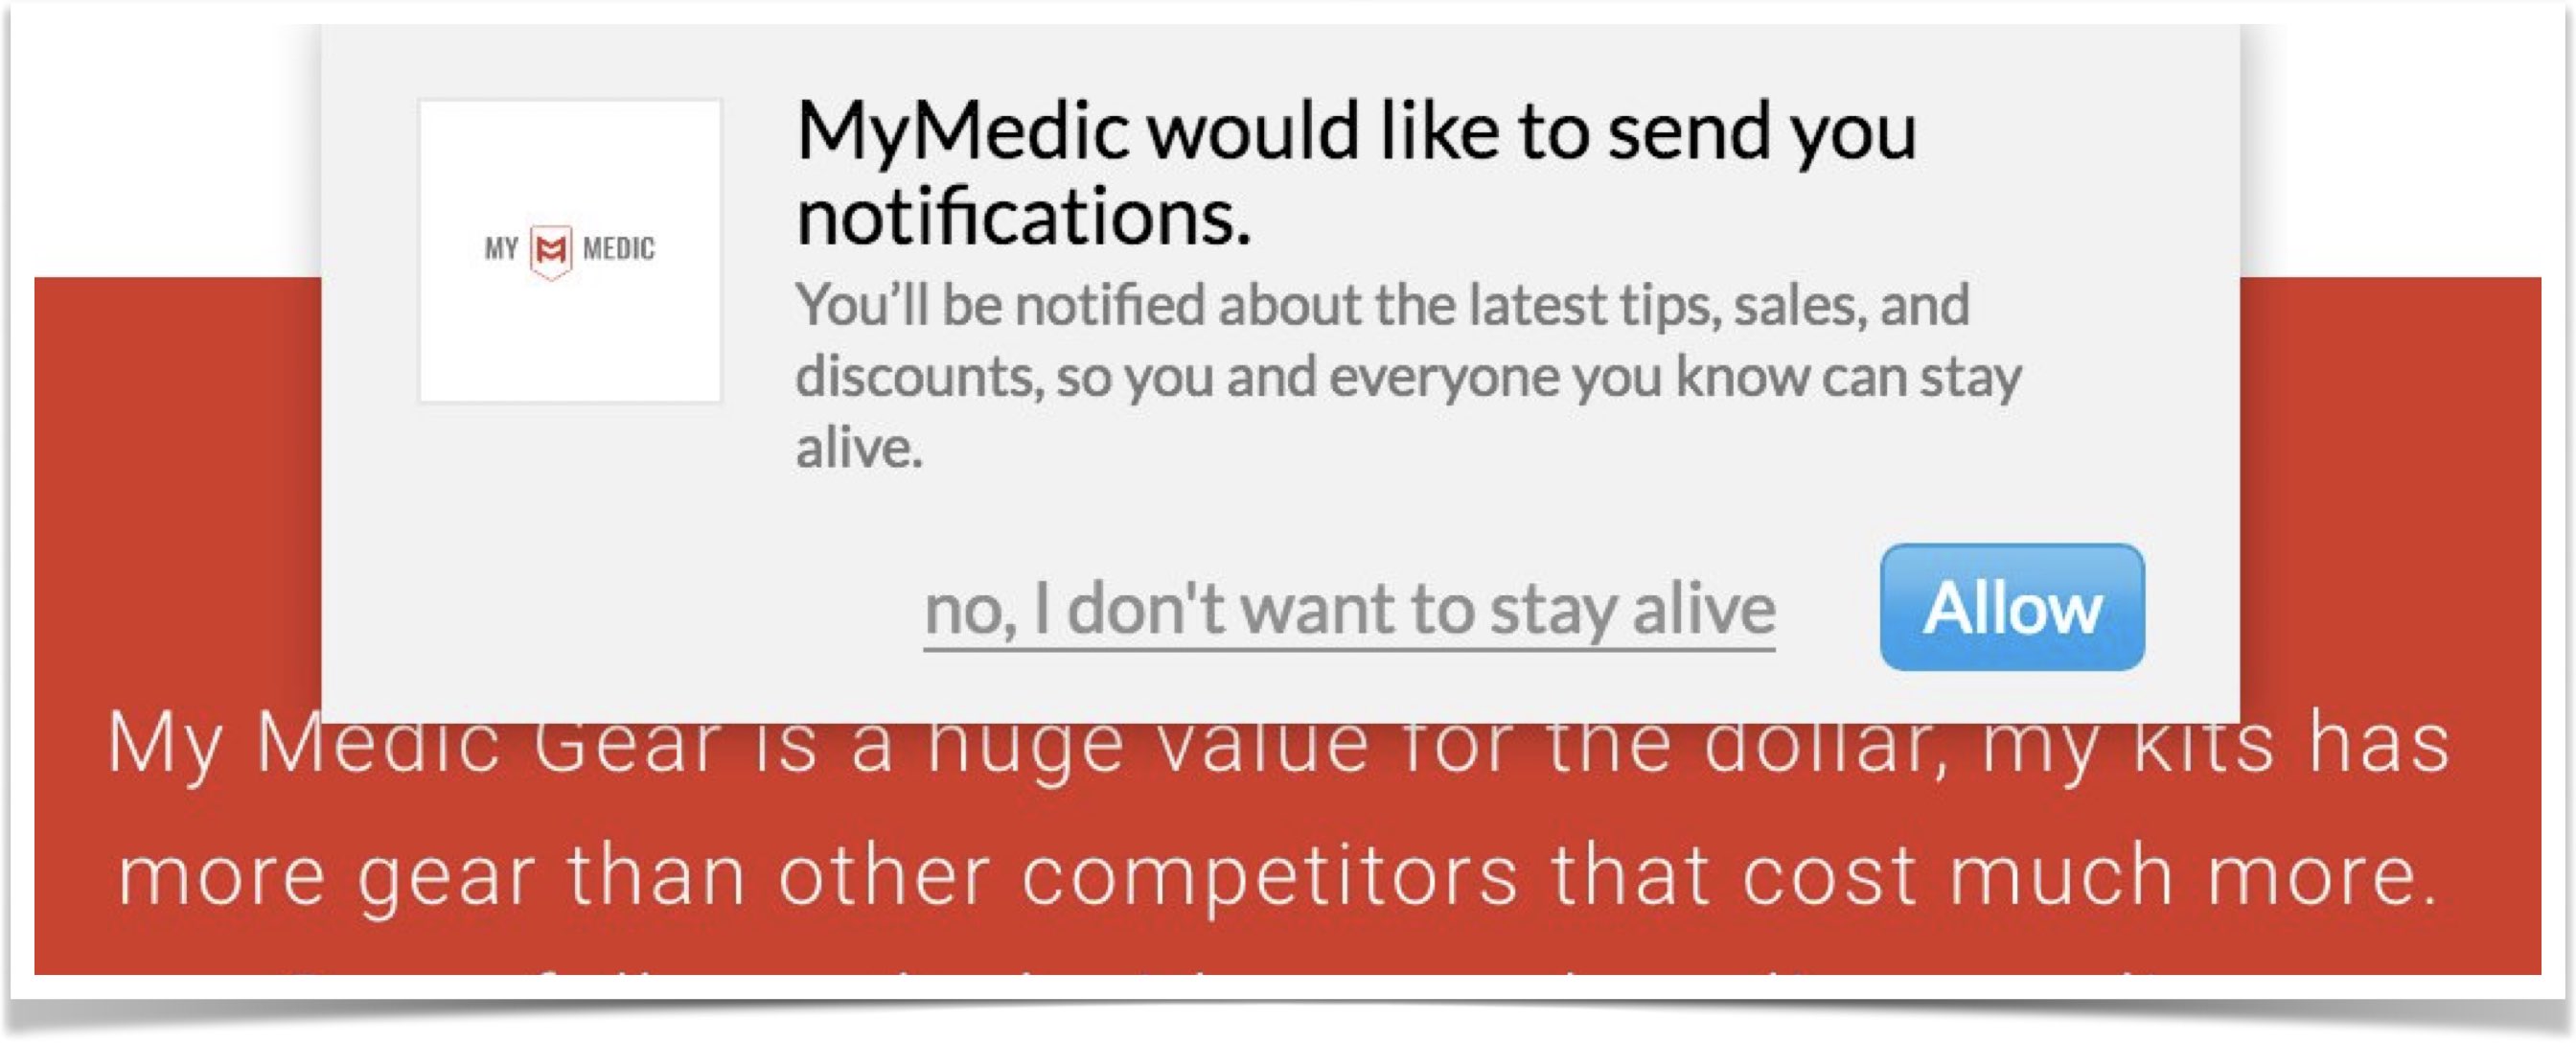 Pop-up stating that MyMedic would like to send notifications; the decline button reads: no, I don't watn to stay alive.